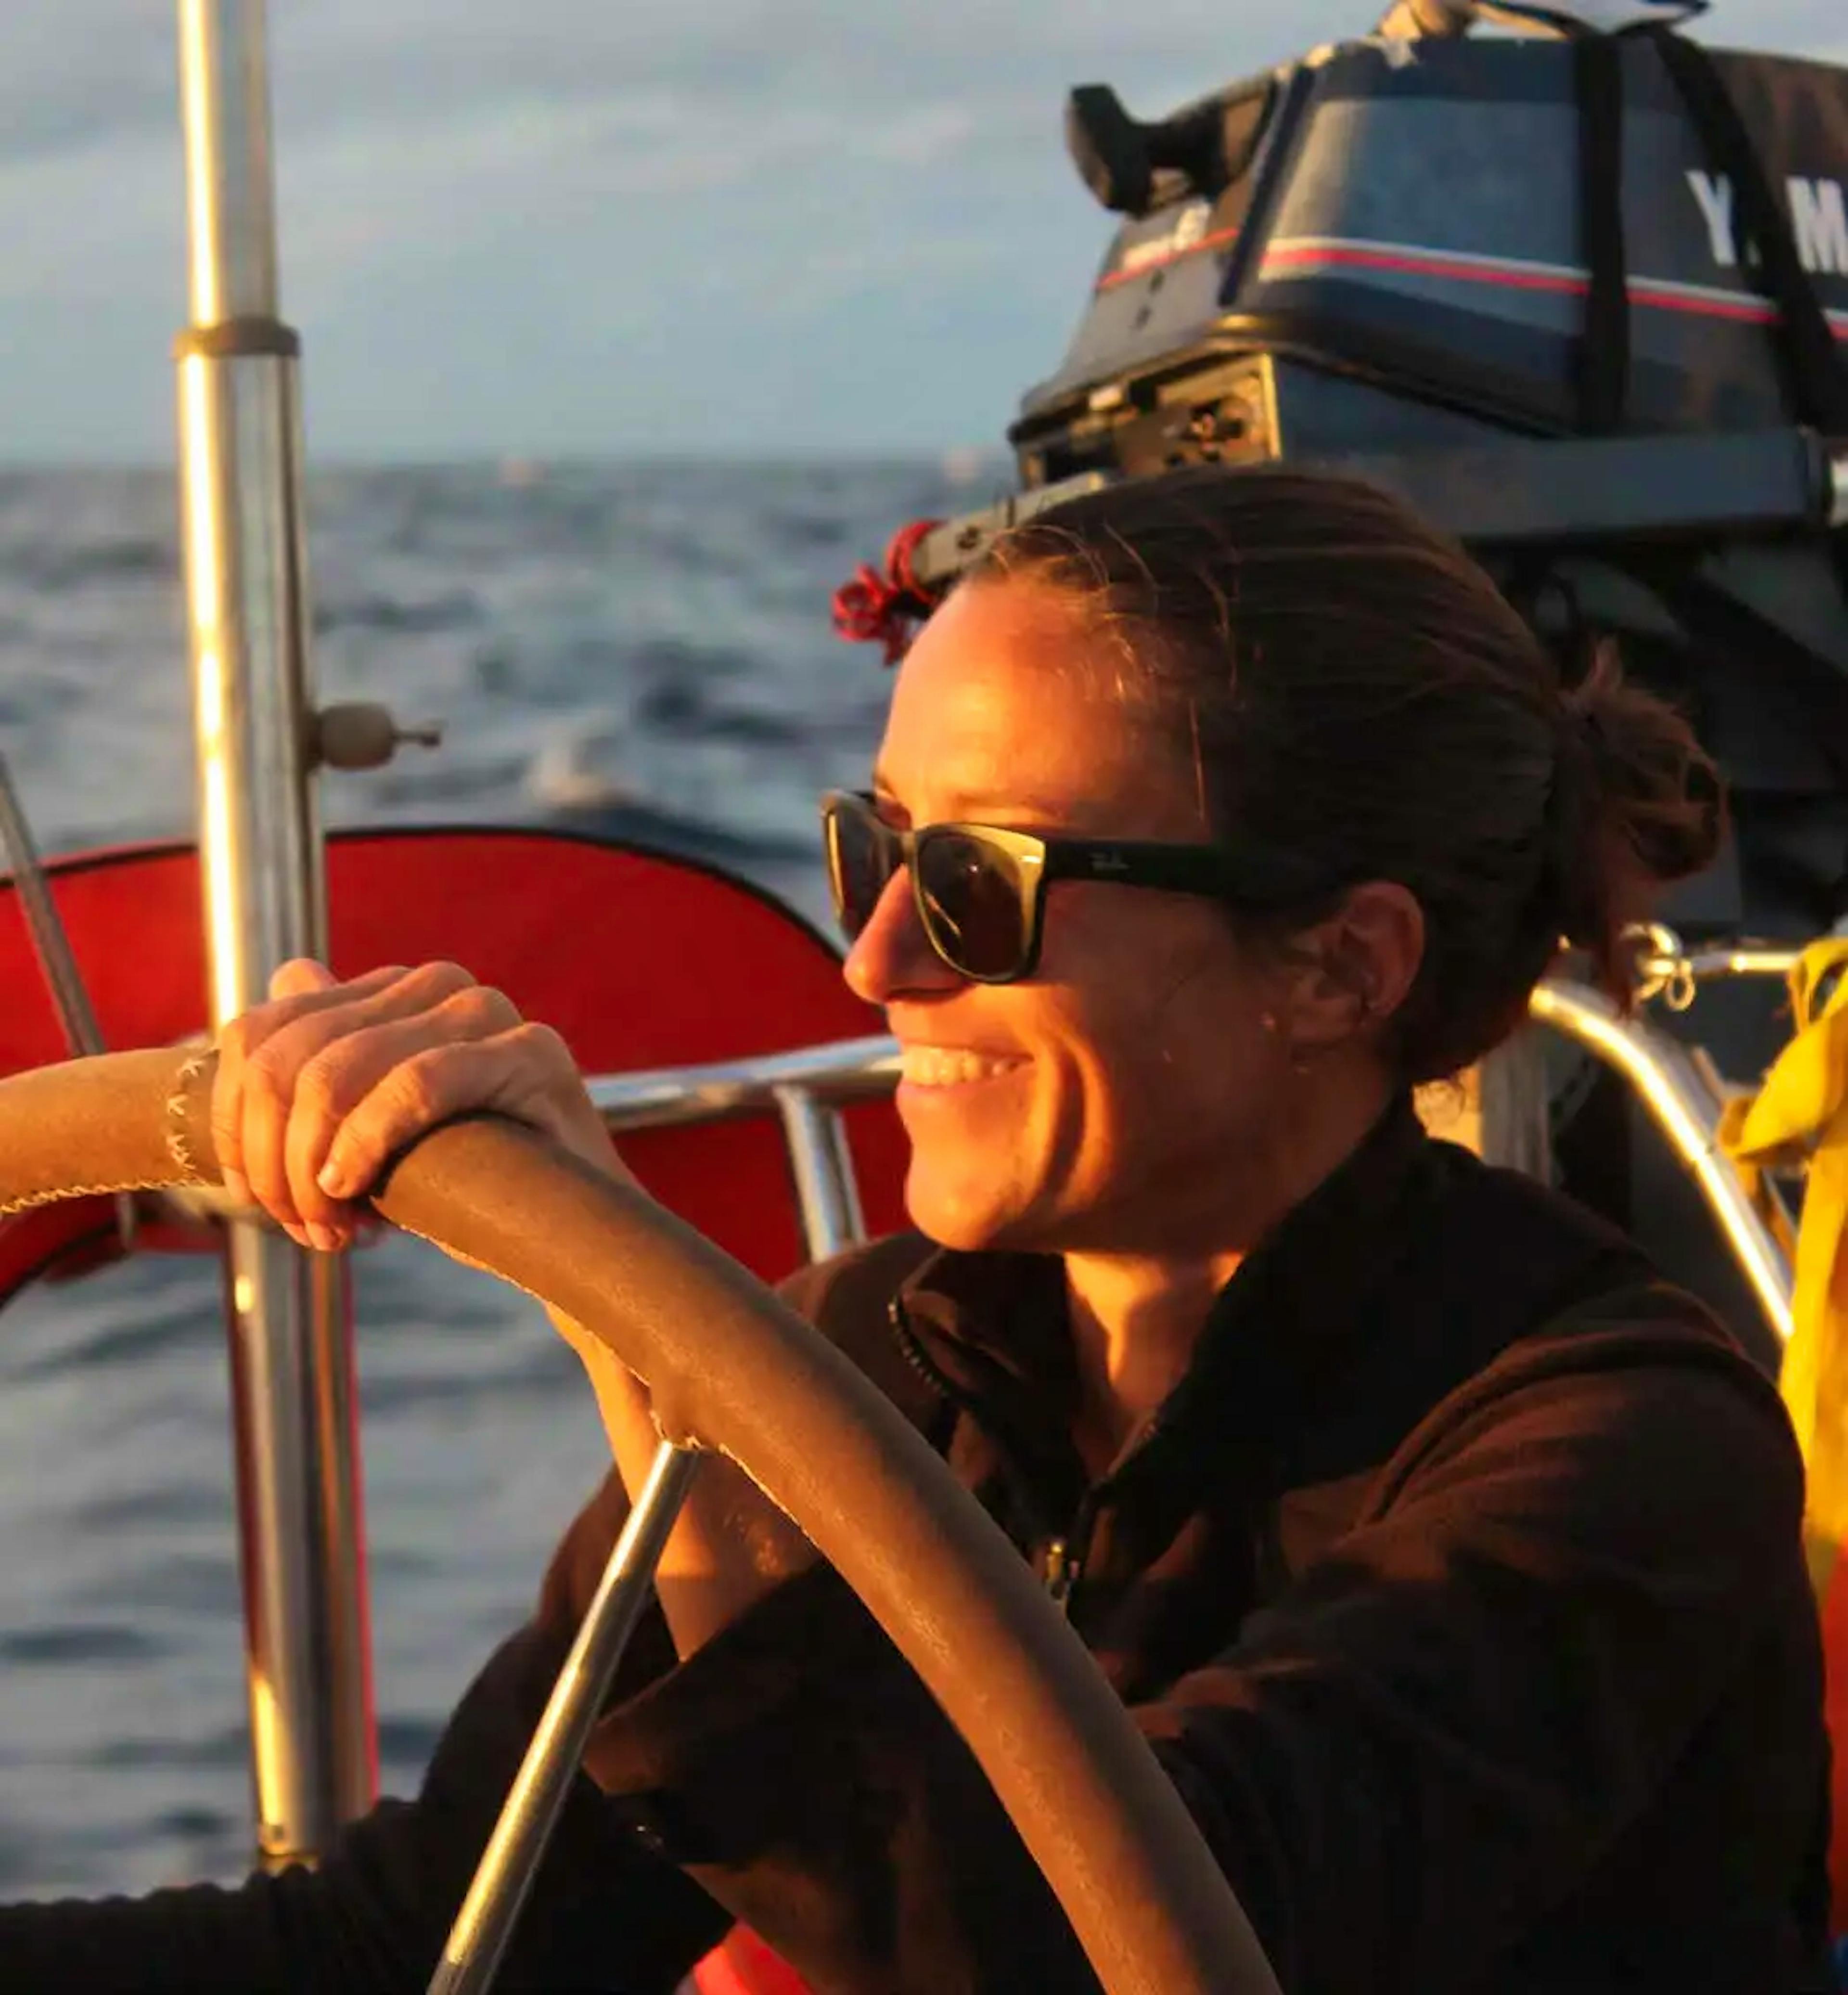 Stealing the show. It is a woman’s world onboard with Sara Teghini